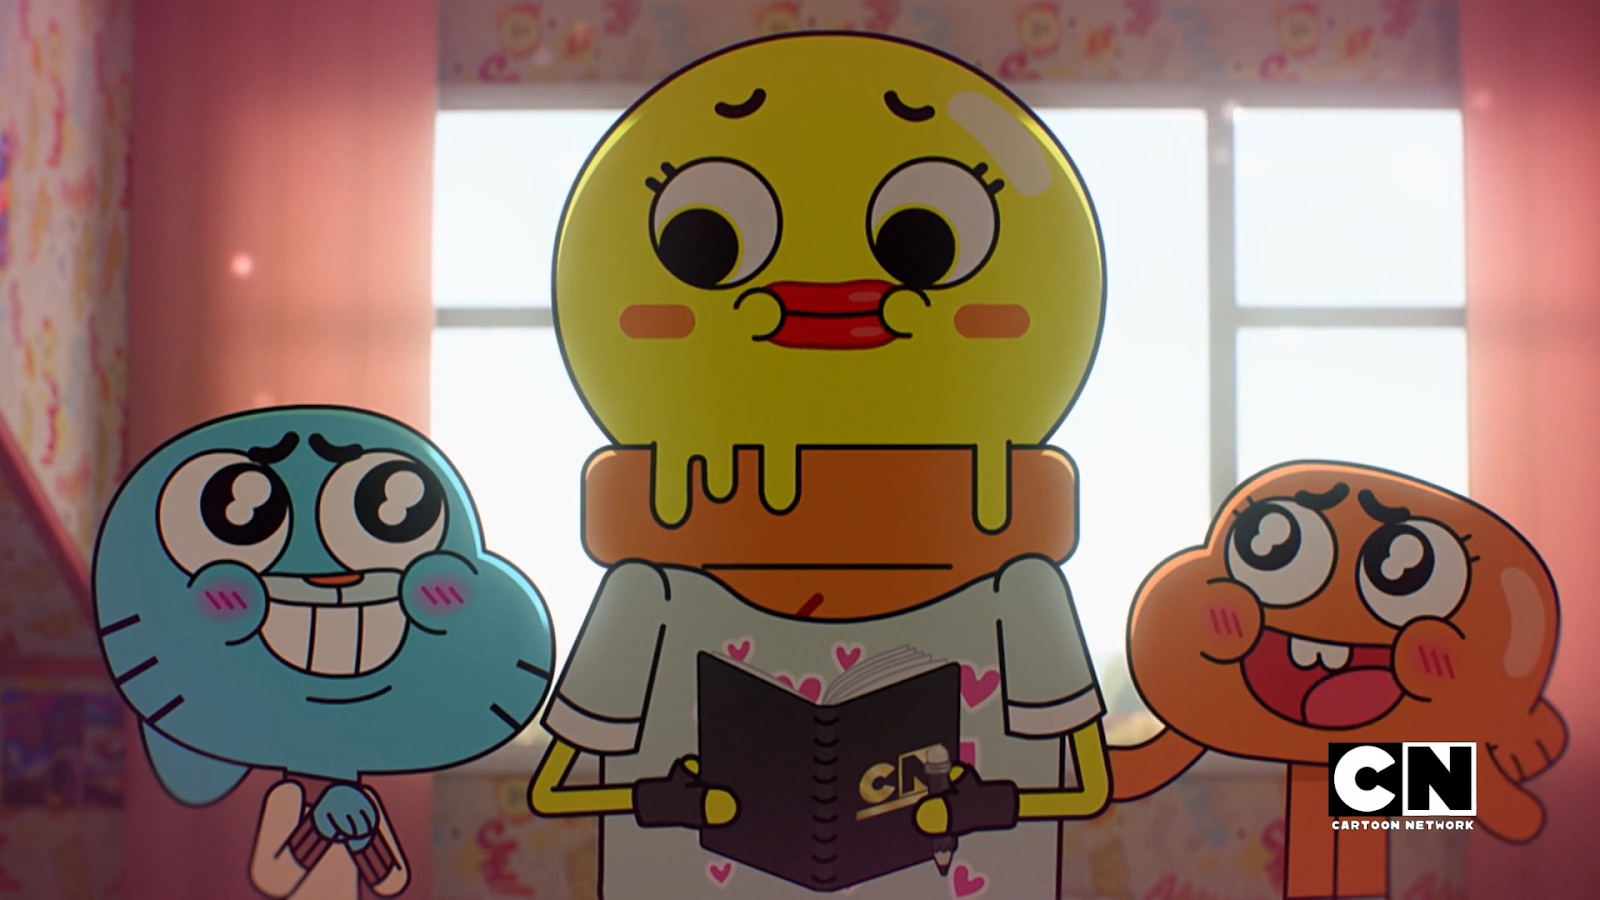 amazing world of gumball the shipping full episode